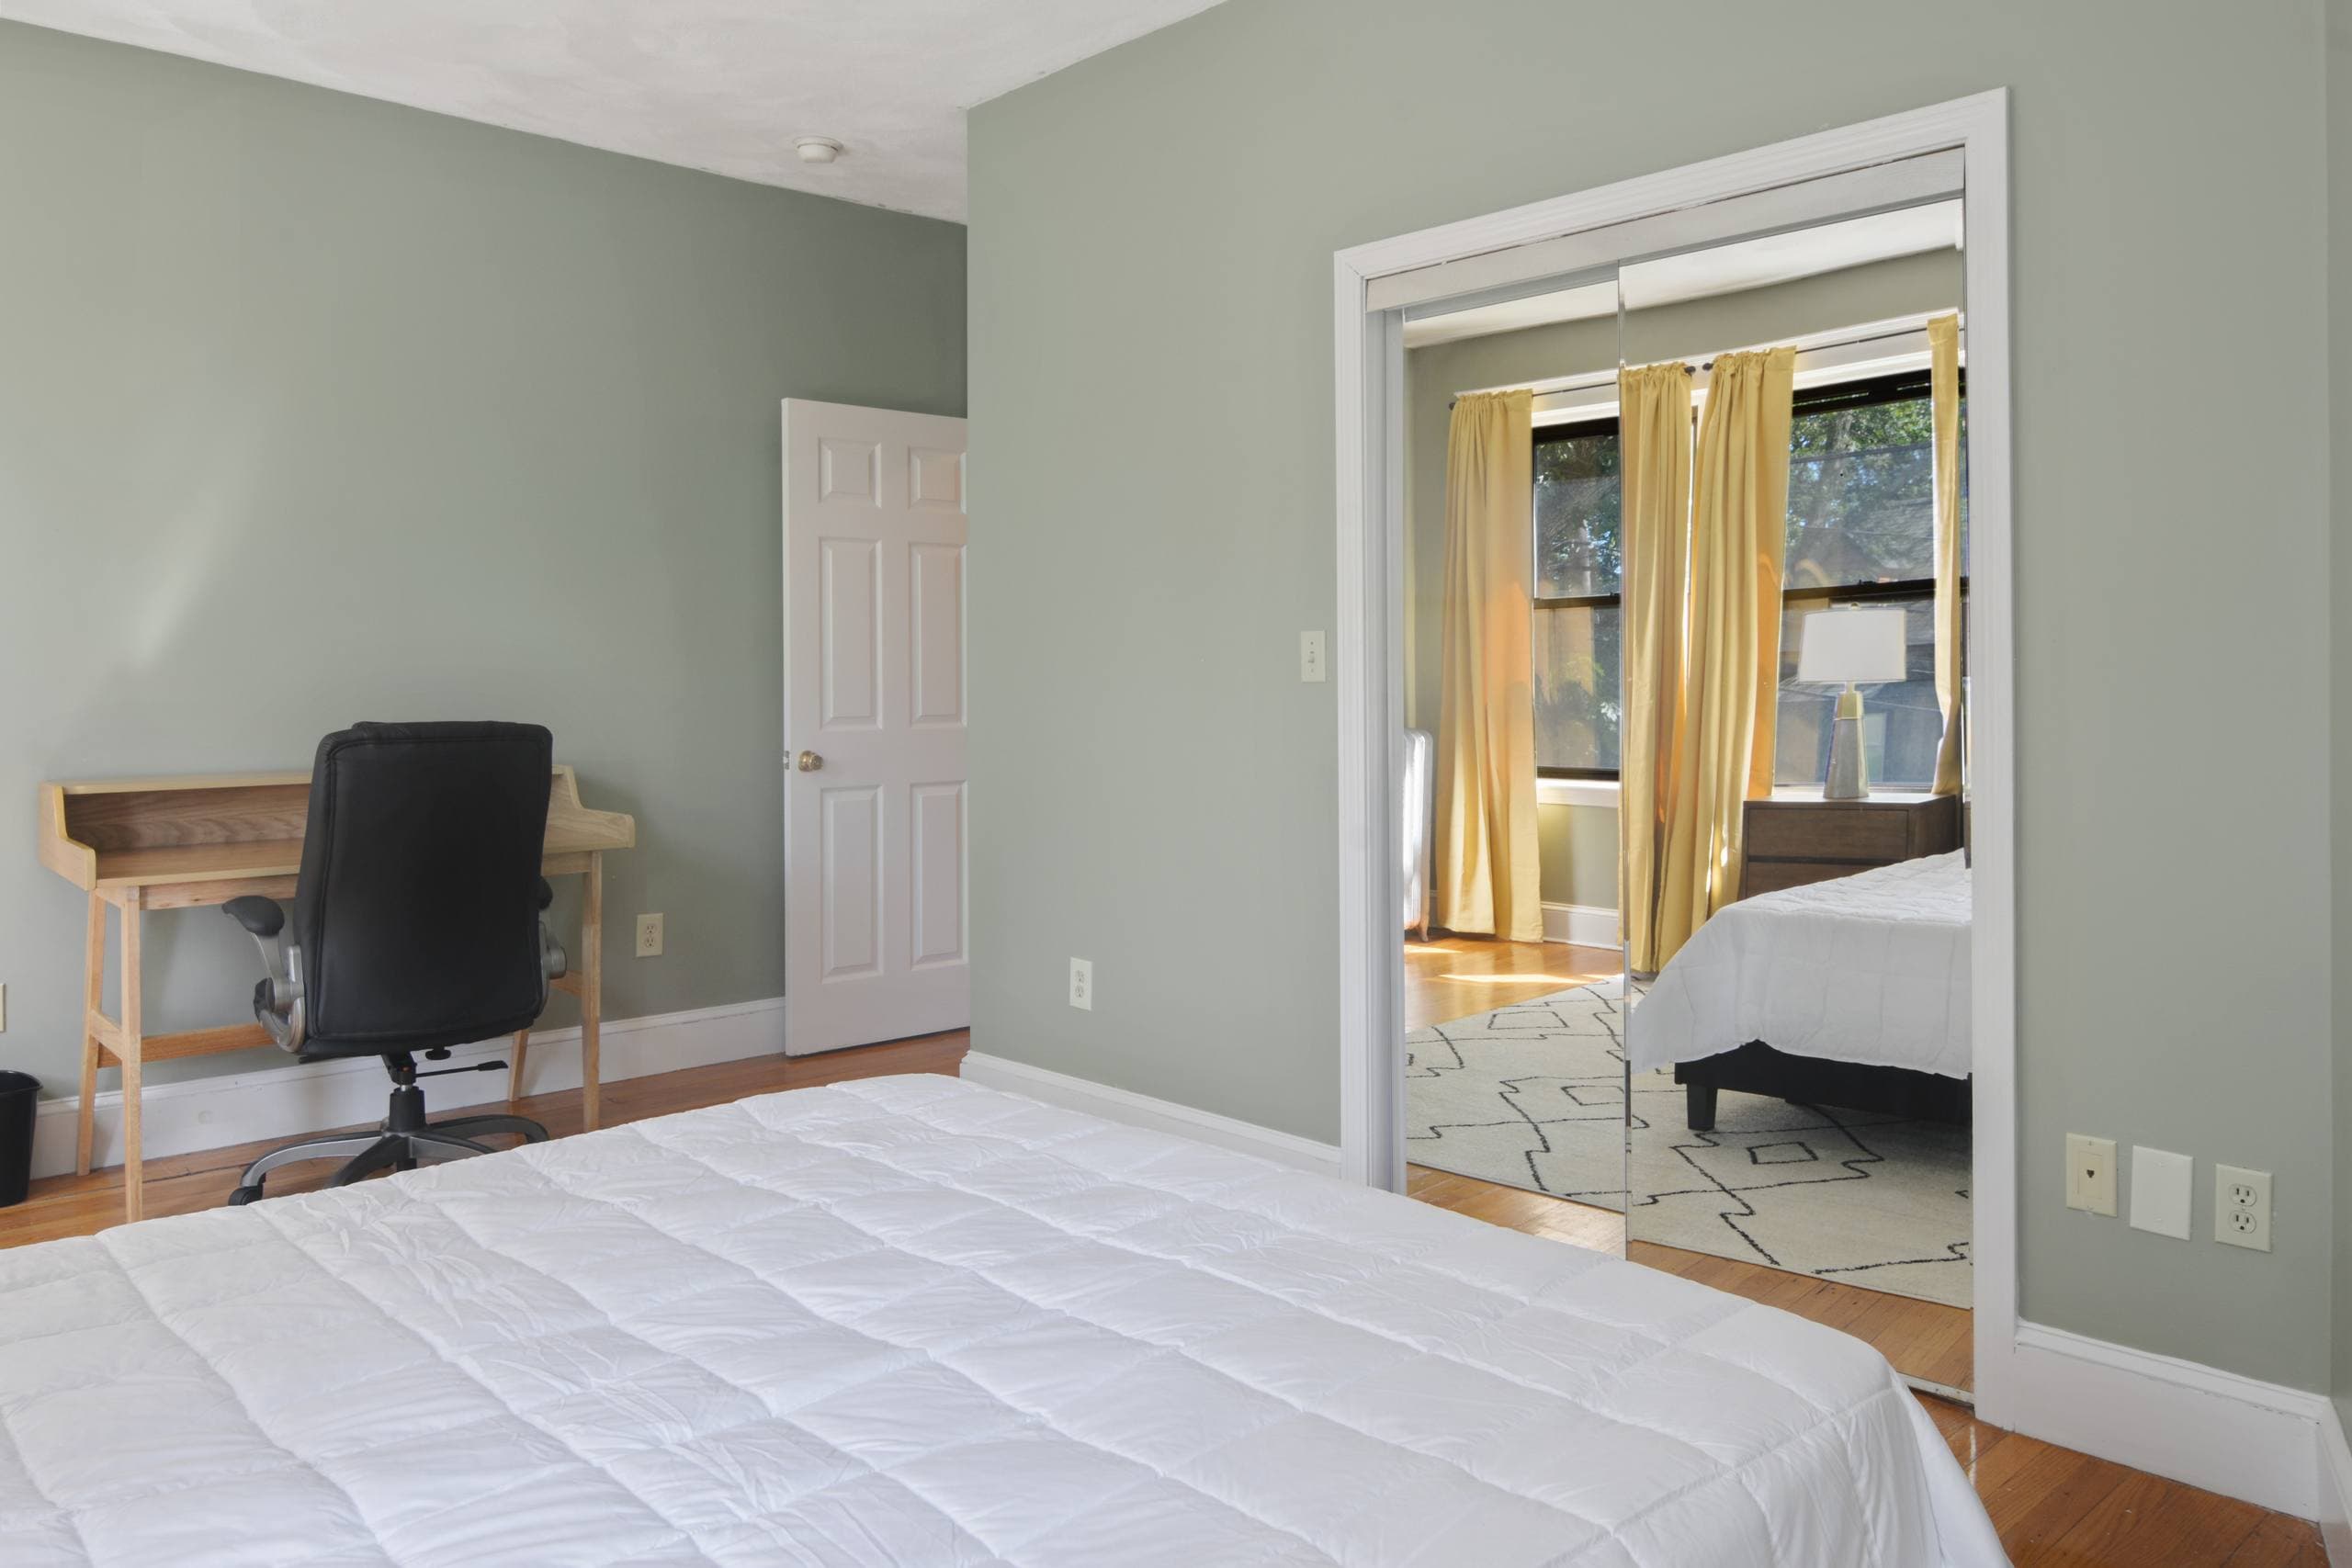 Photo 3 of #1683: Queen Bedroom A at June Homes